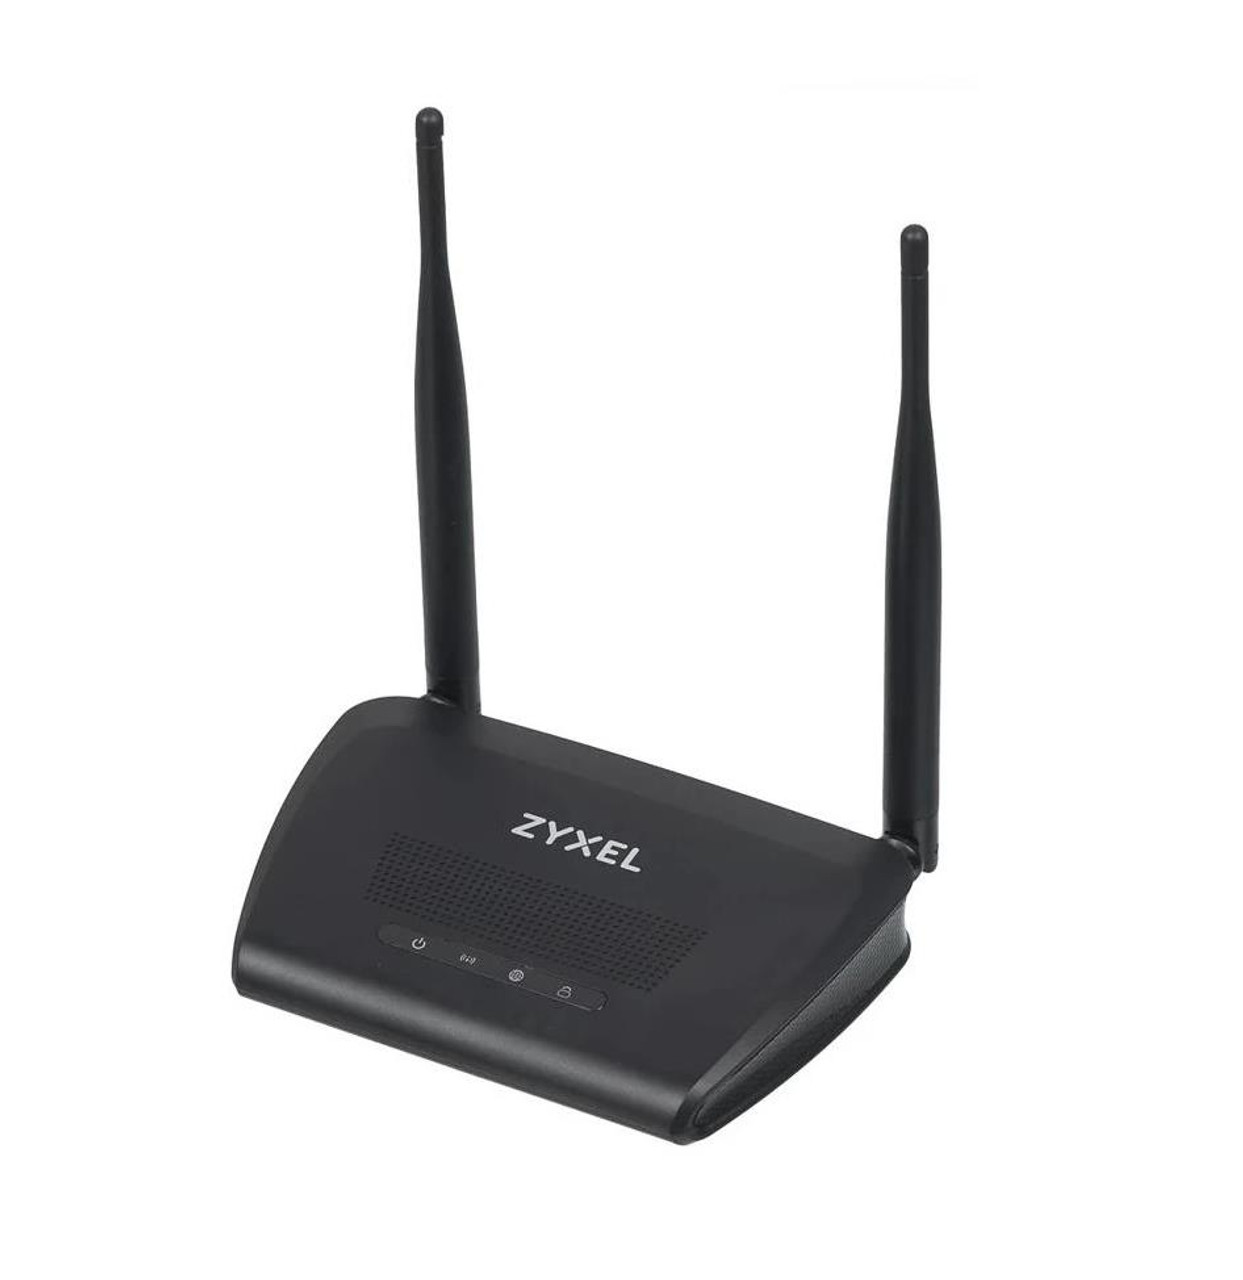 NBG6515 Zyxel 802.11ac Dual-Band Wireless Router (Refurbished)